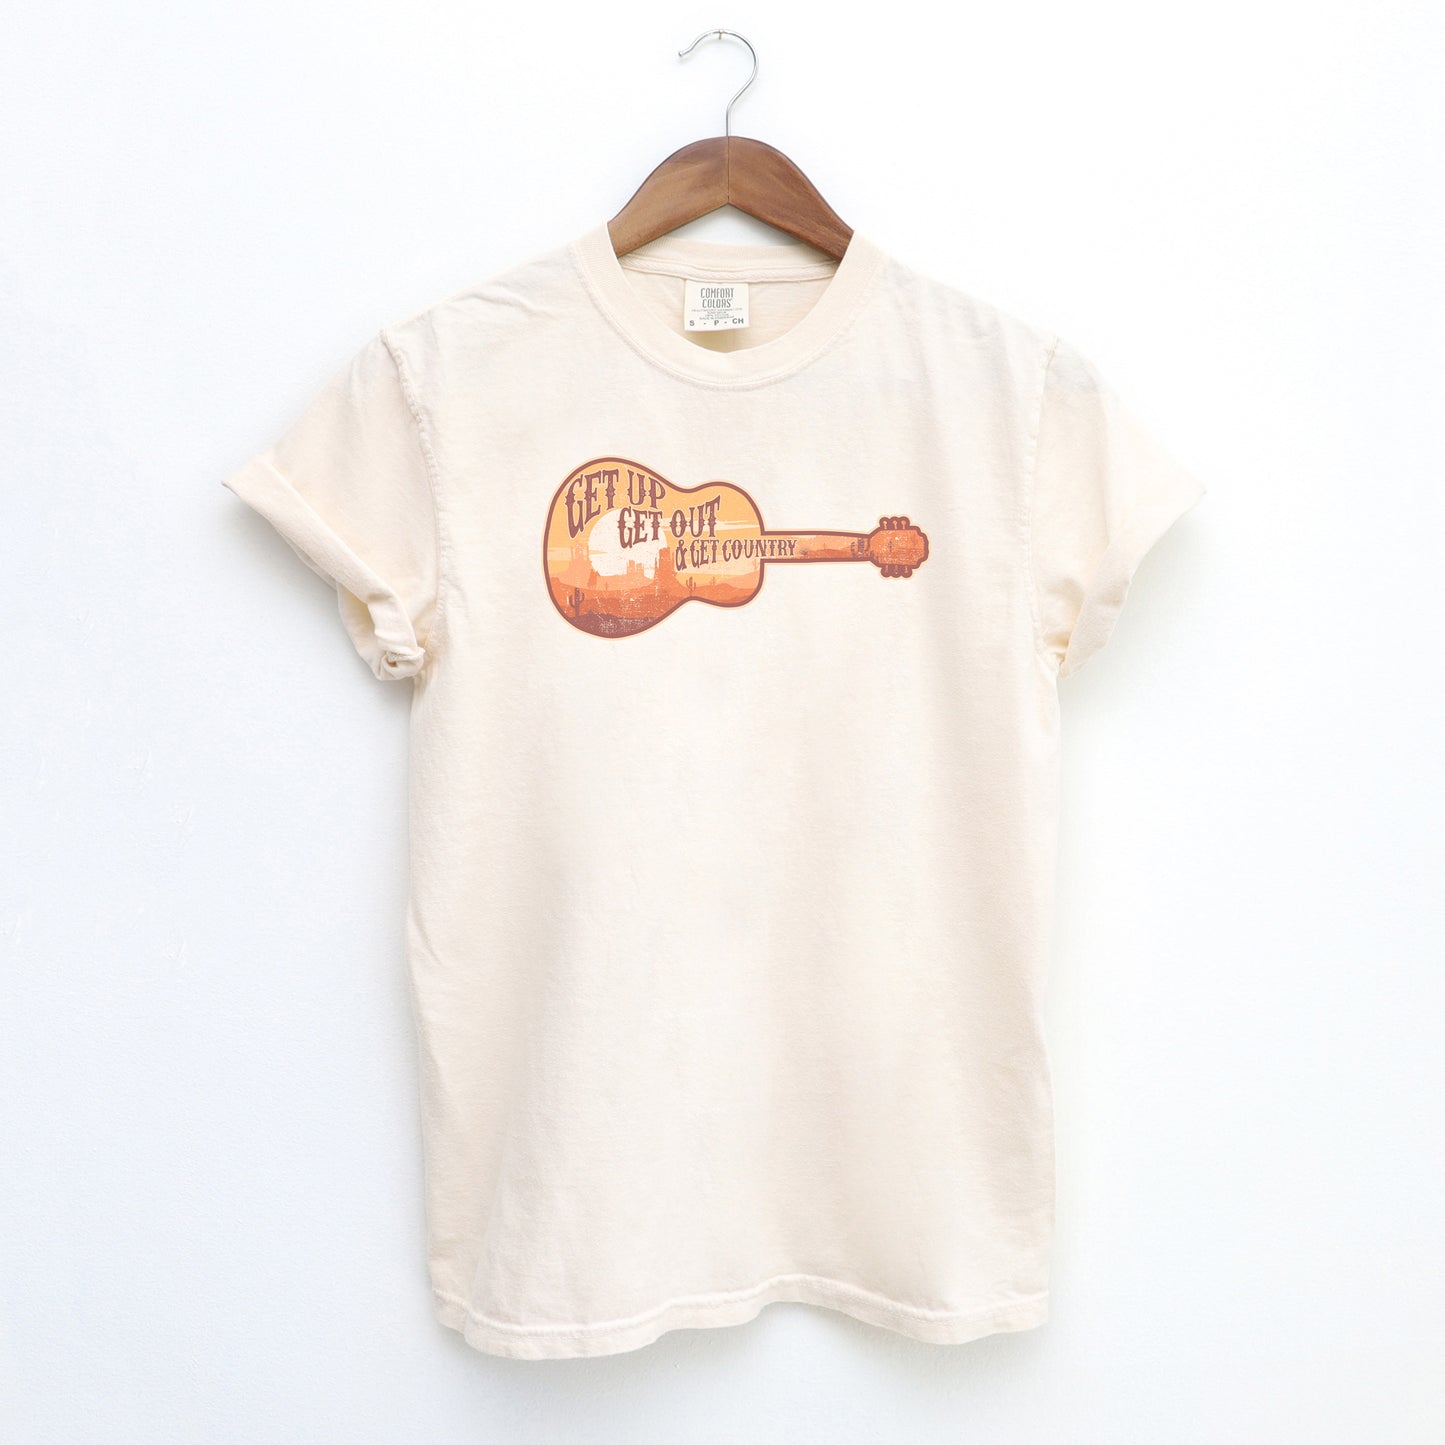 Get Up Get Out Get Country | Garment Dyed Tee